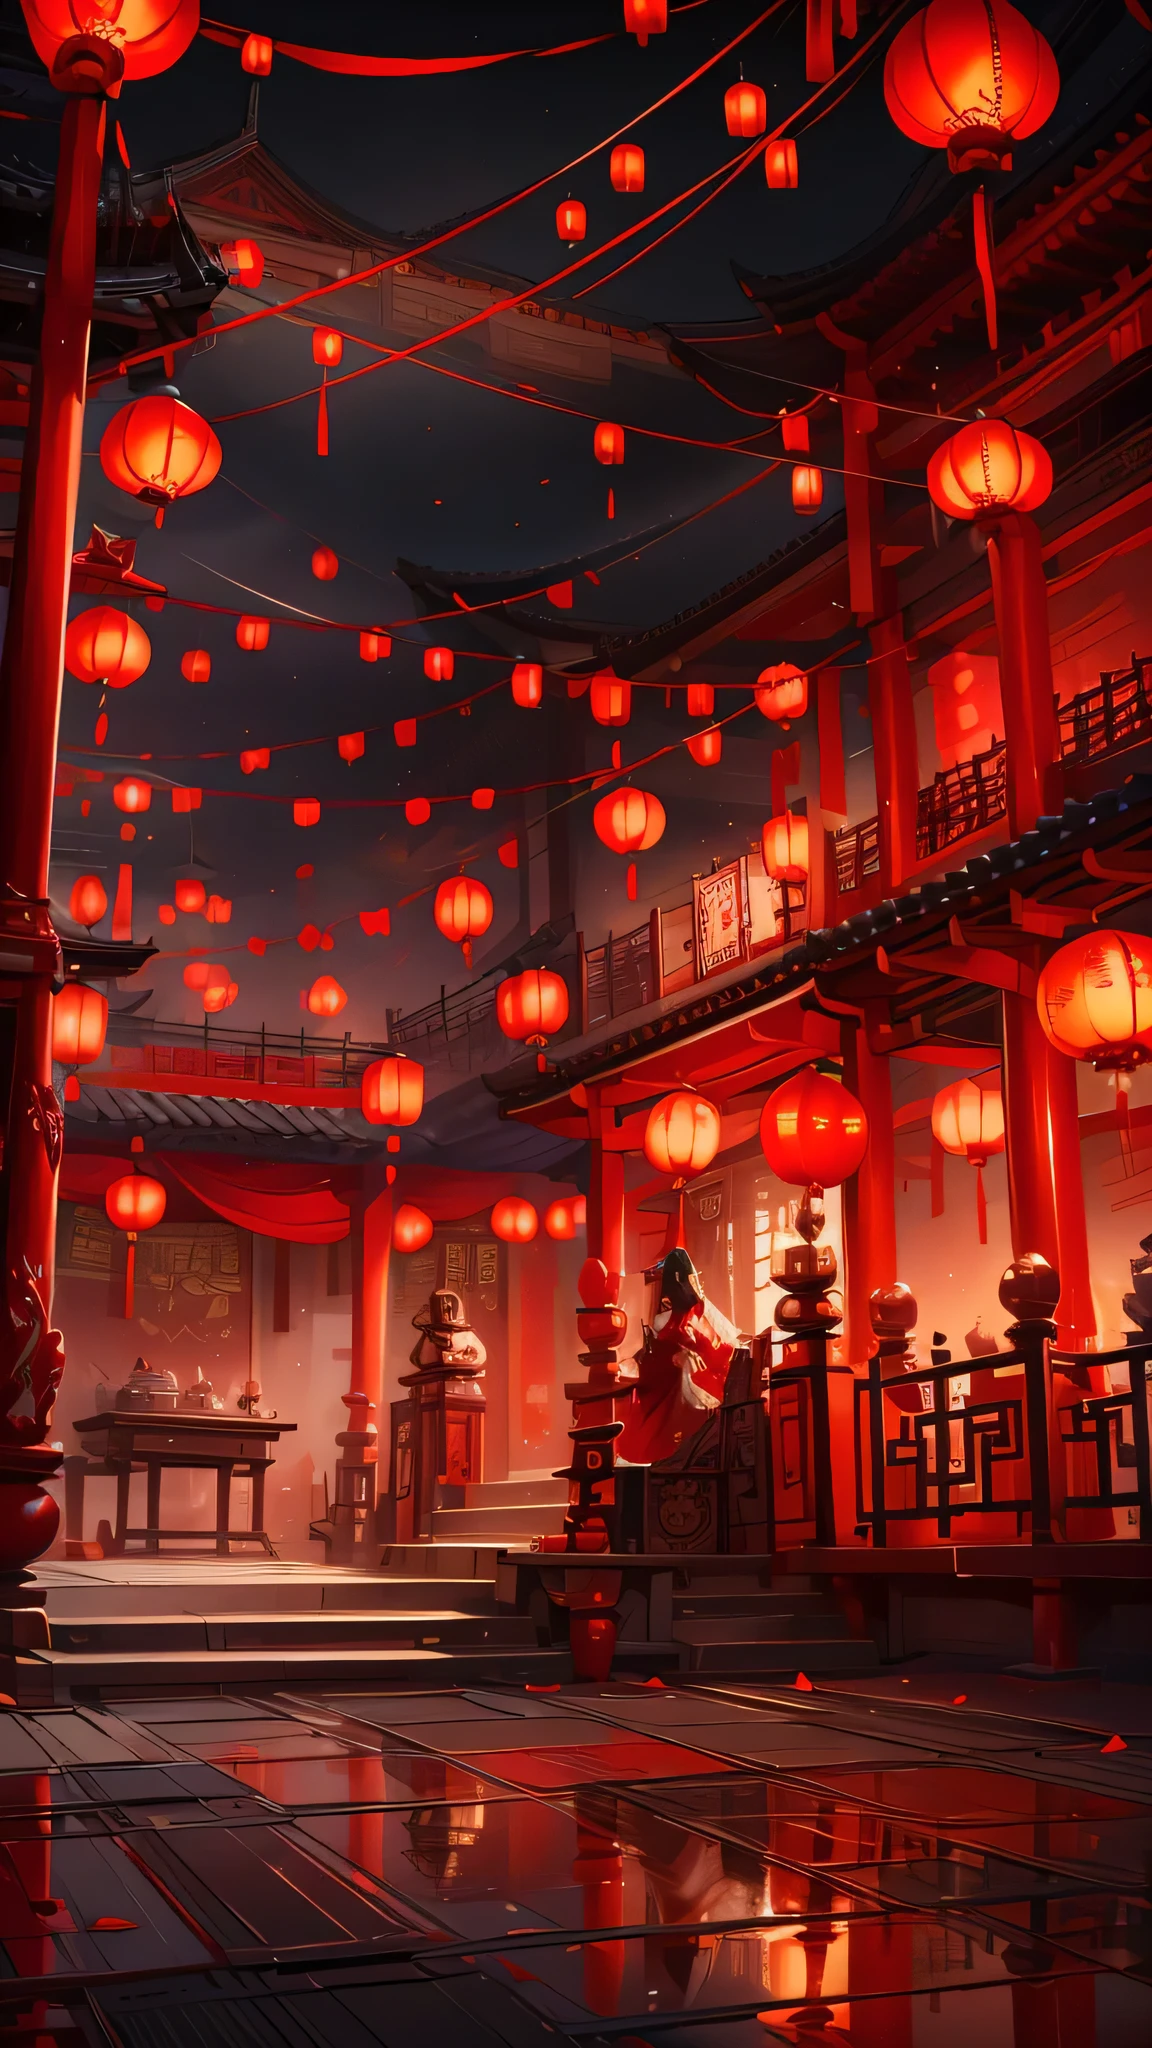 CNY， Red wedding dress, china city , Thongbu lamp ,red ribbon hanging，Quixel Megascans rendering , high detail , 8k，red lantern speechless， Red，festive，nobody，Red decoration on background，Red，Pixar, charming, Cartoonish，Business posters，There are decorations around，happiness,